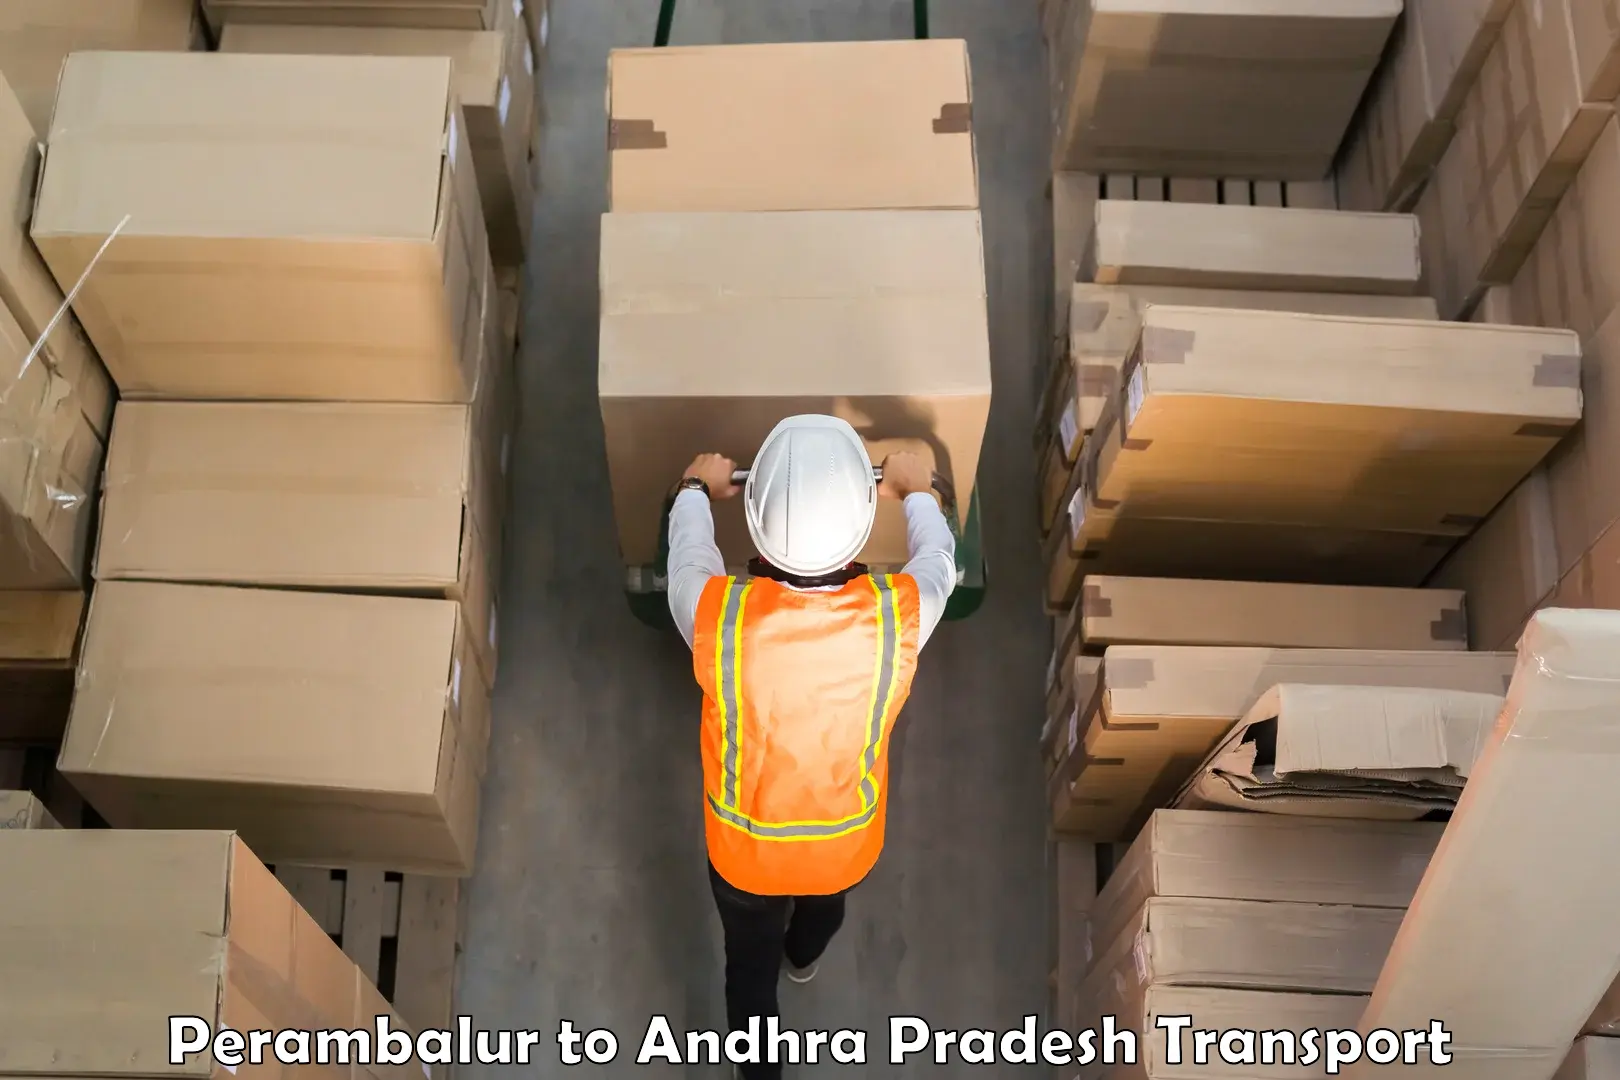 Delivery service Perambalur to Tripuranthakam